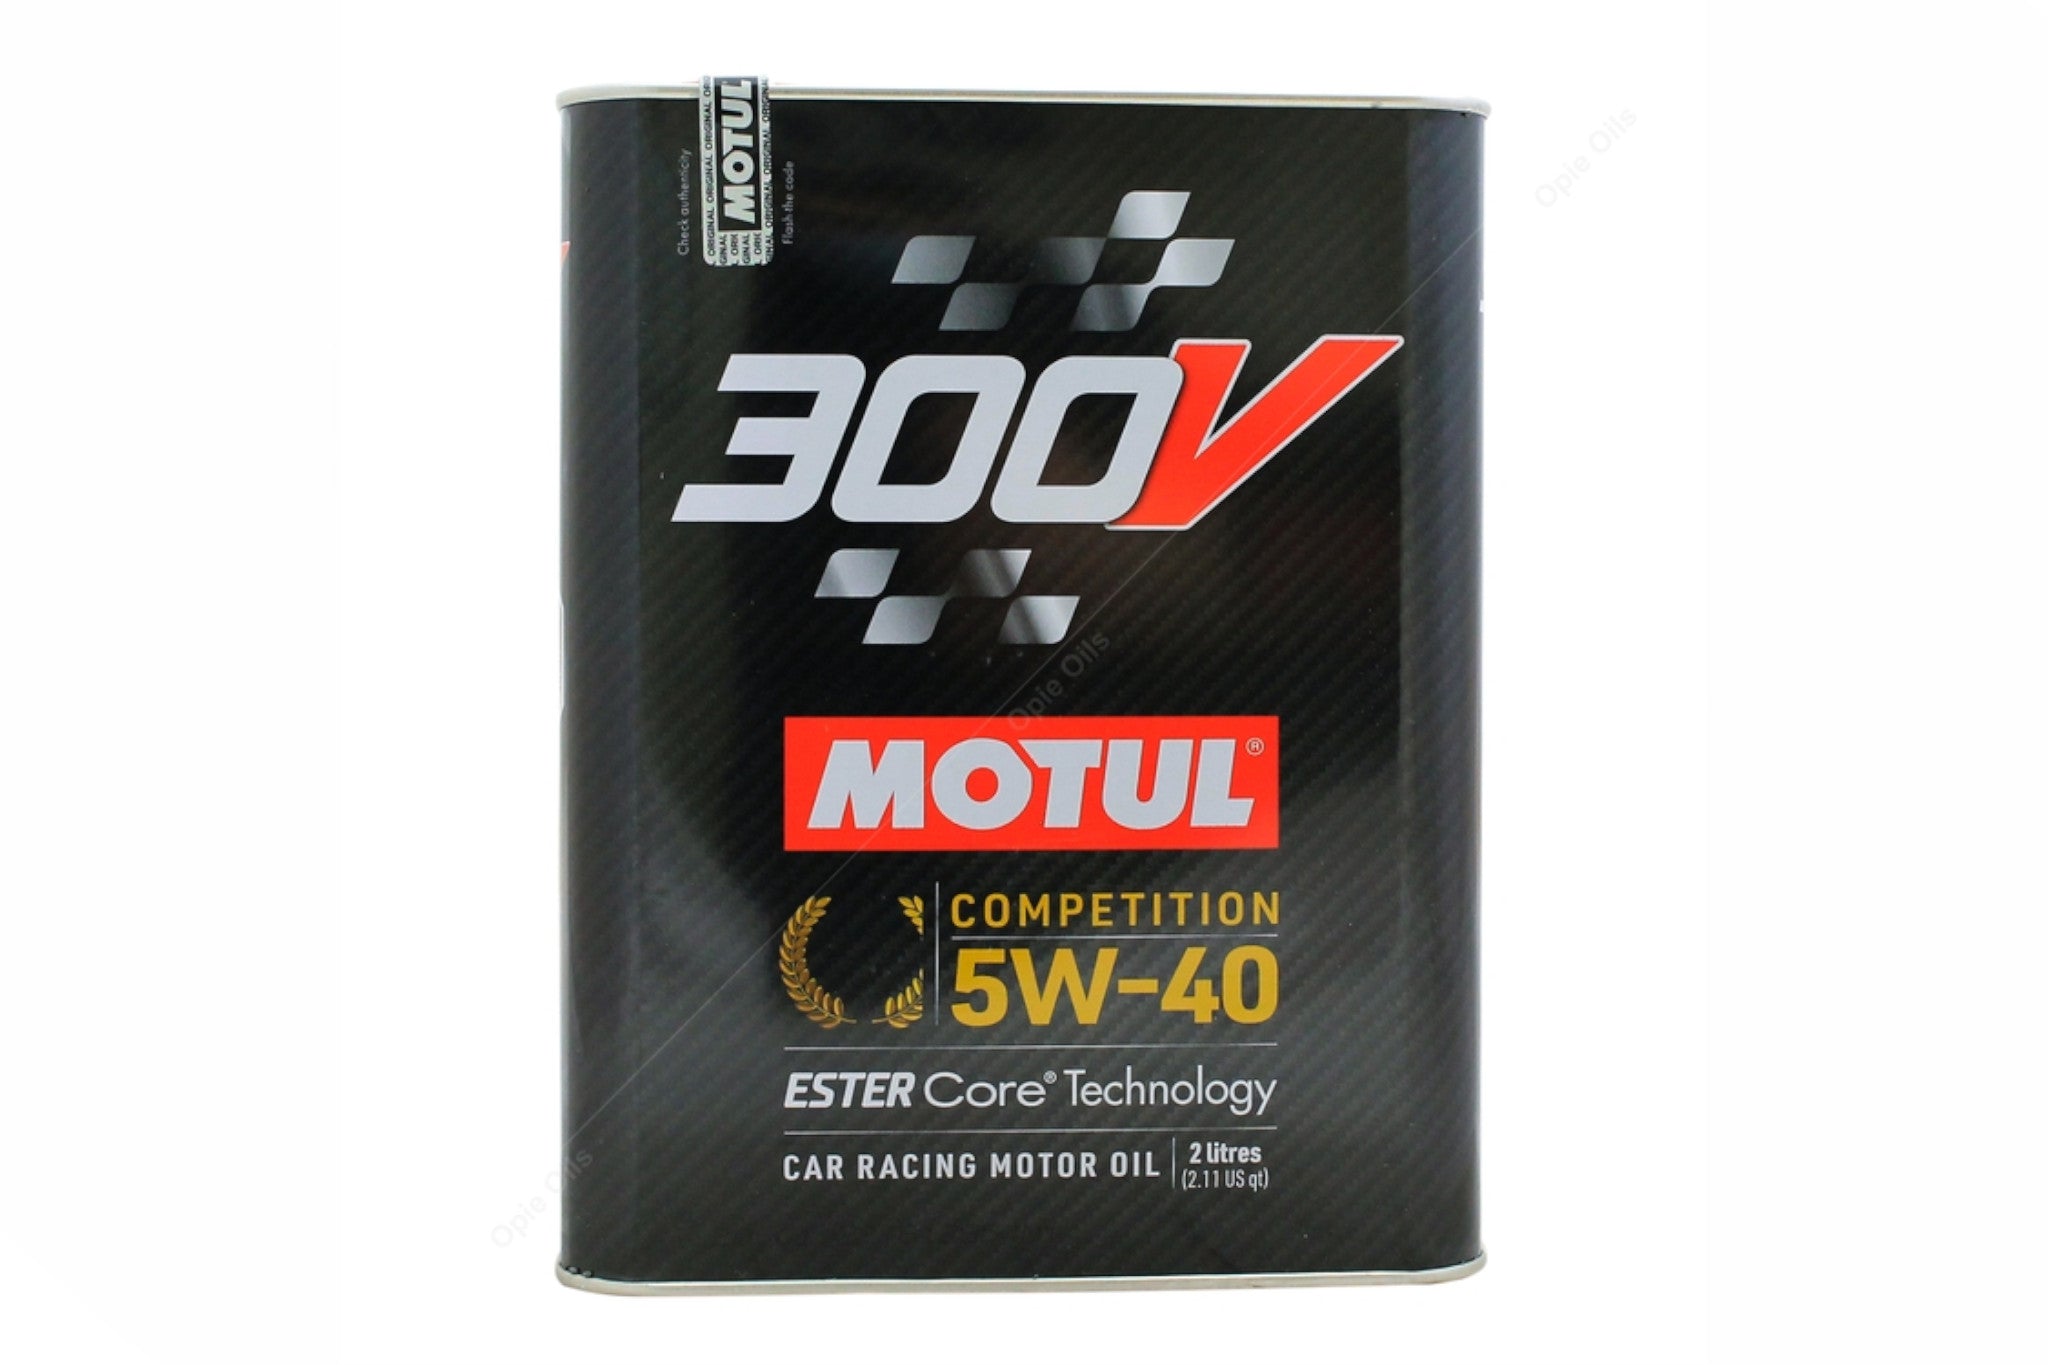 Motul 300v Competition 5w40 Fully Synthetic Car Engine Oil - Evolve Automotive